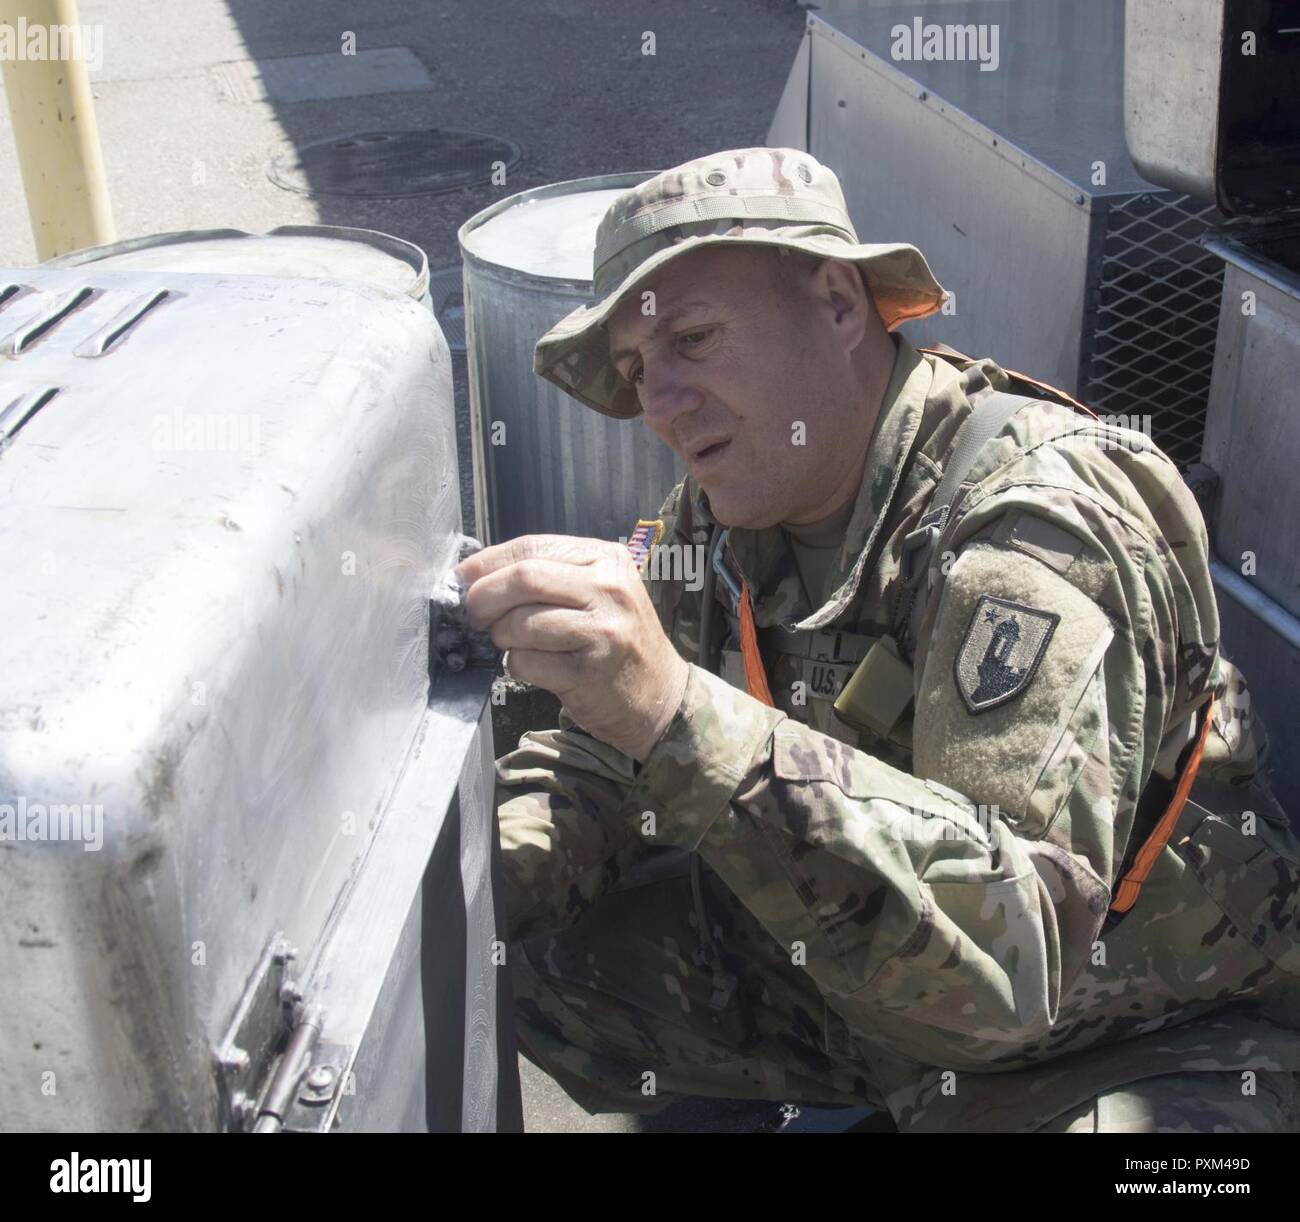 Sgt. Eric R. Collazo, a culinary specialist with the 1473rd Quartermaster Company, Puerto Rico Army National Guard, cleans cooking equipment after serving breakfast June 12, 2017, during Mississippi's 155th Armored Brigade Combat Team’s rotation at the National Training Center. The 1473rd is one of 40 units supporting the 155th during training at NTC. (Mississippi Stock Photo